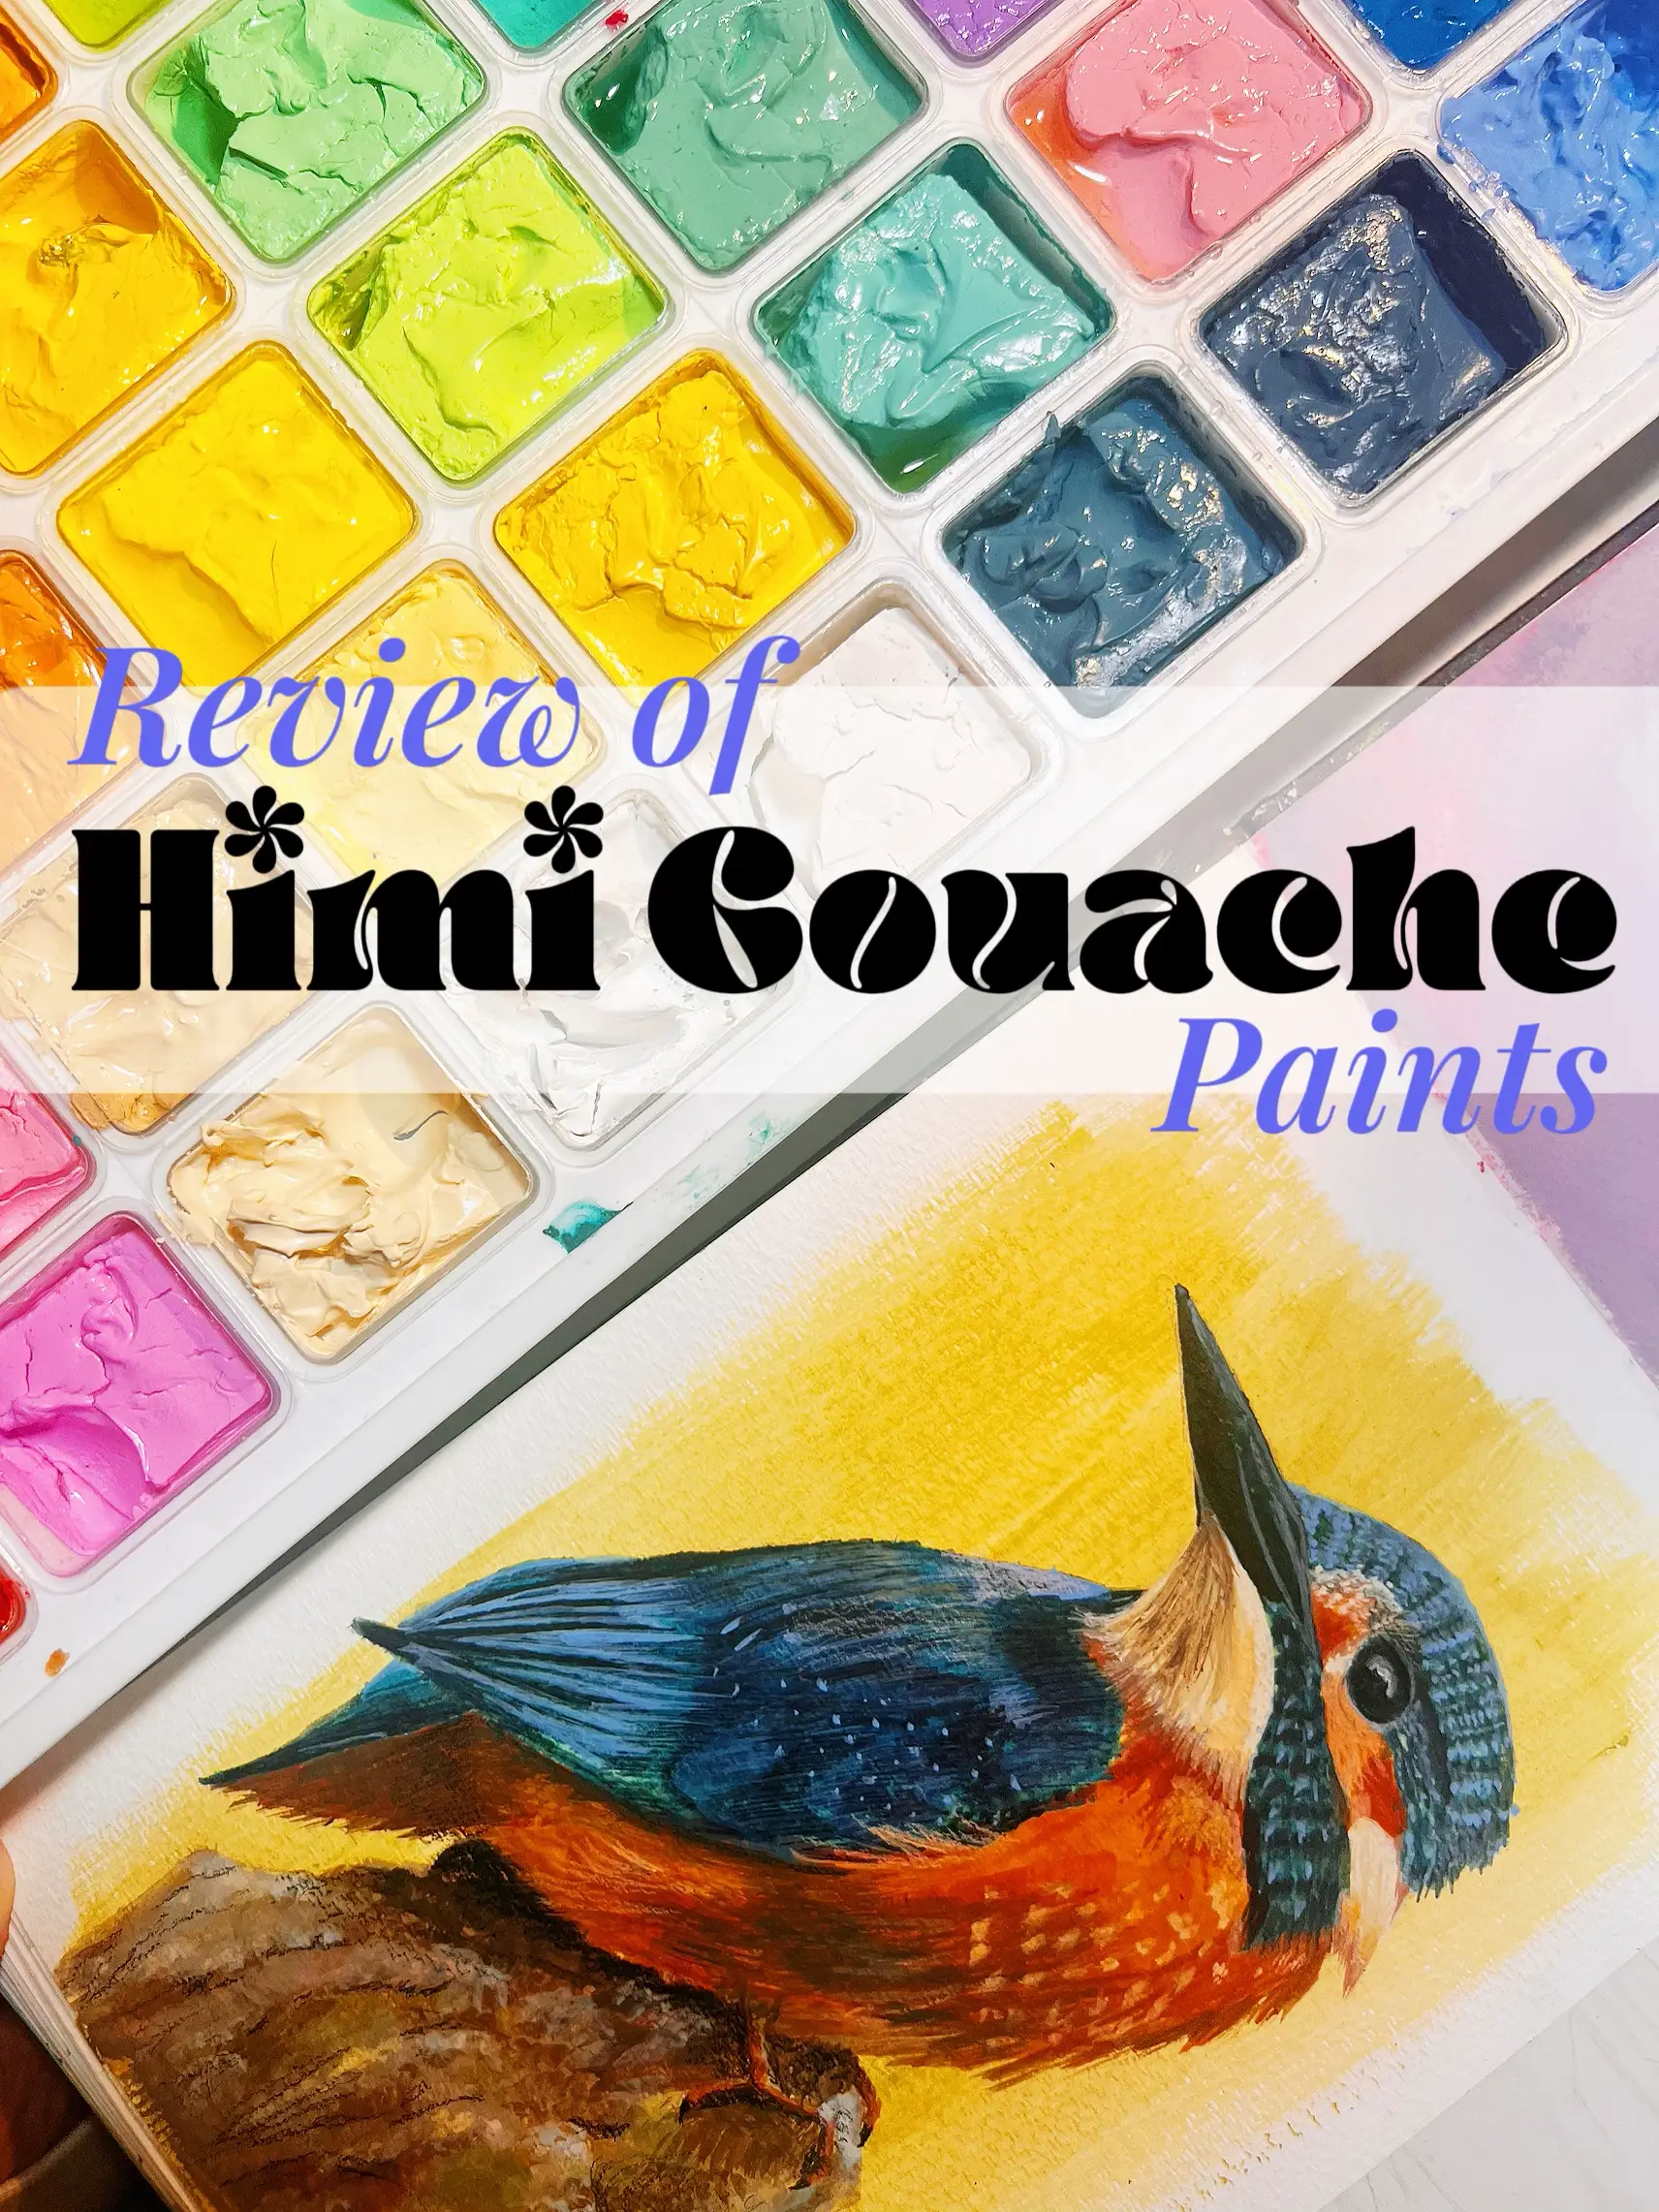 More on the HIMI Gouache Paints, Video published by Ariel Snyder